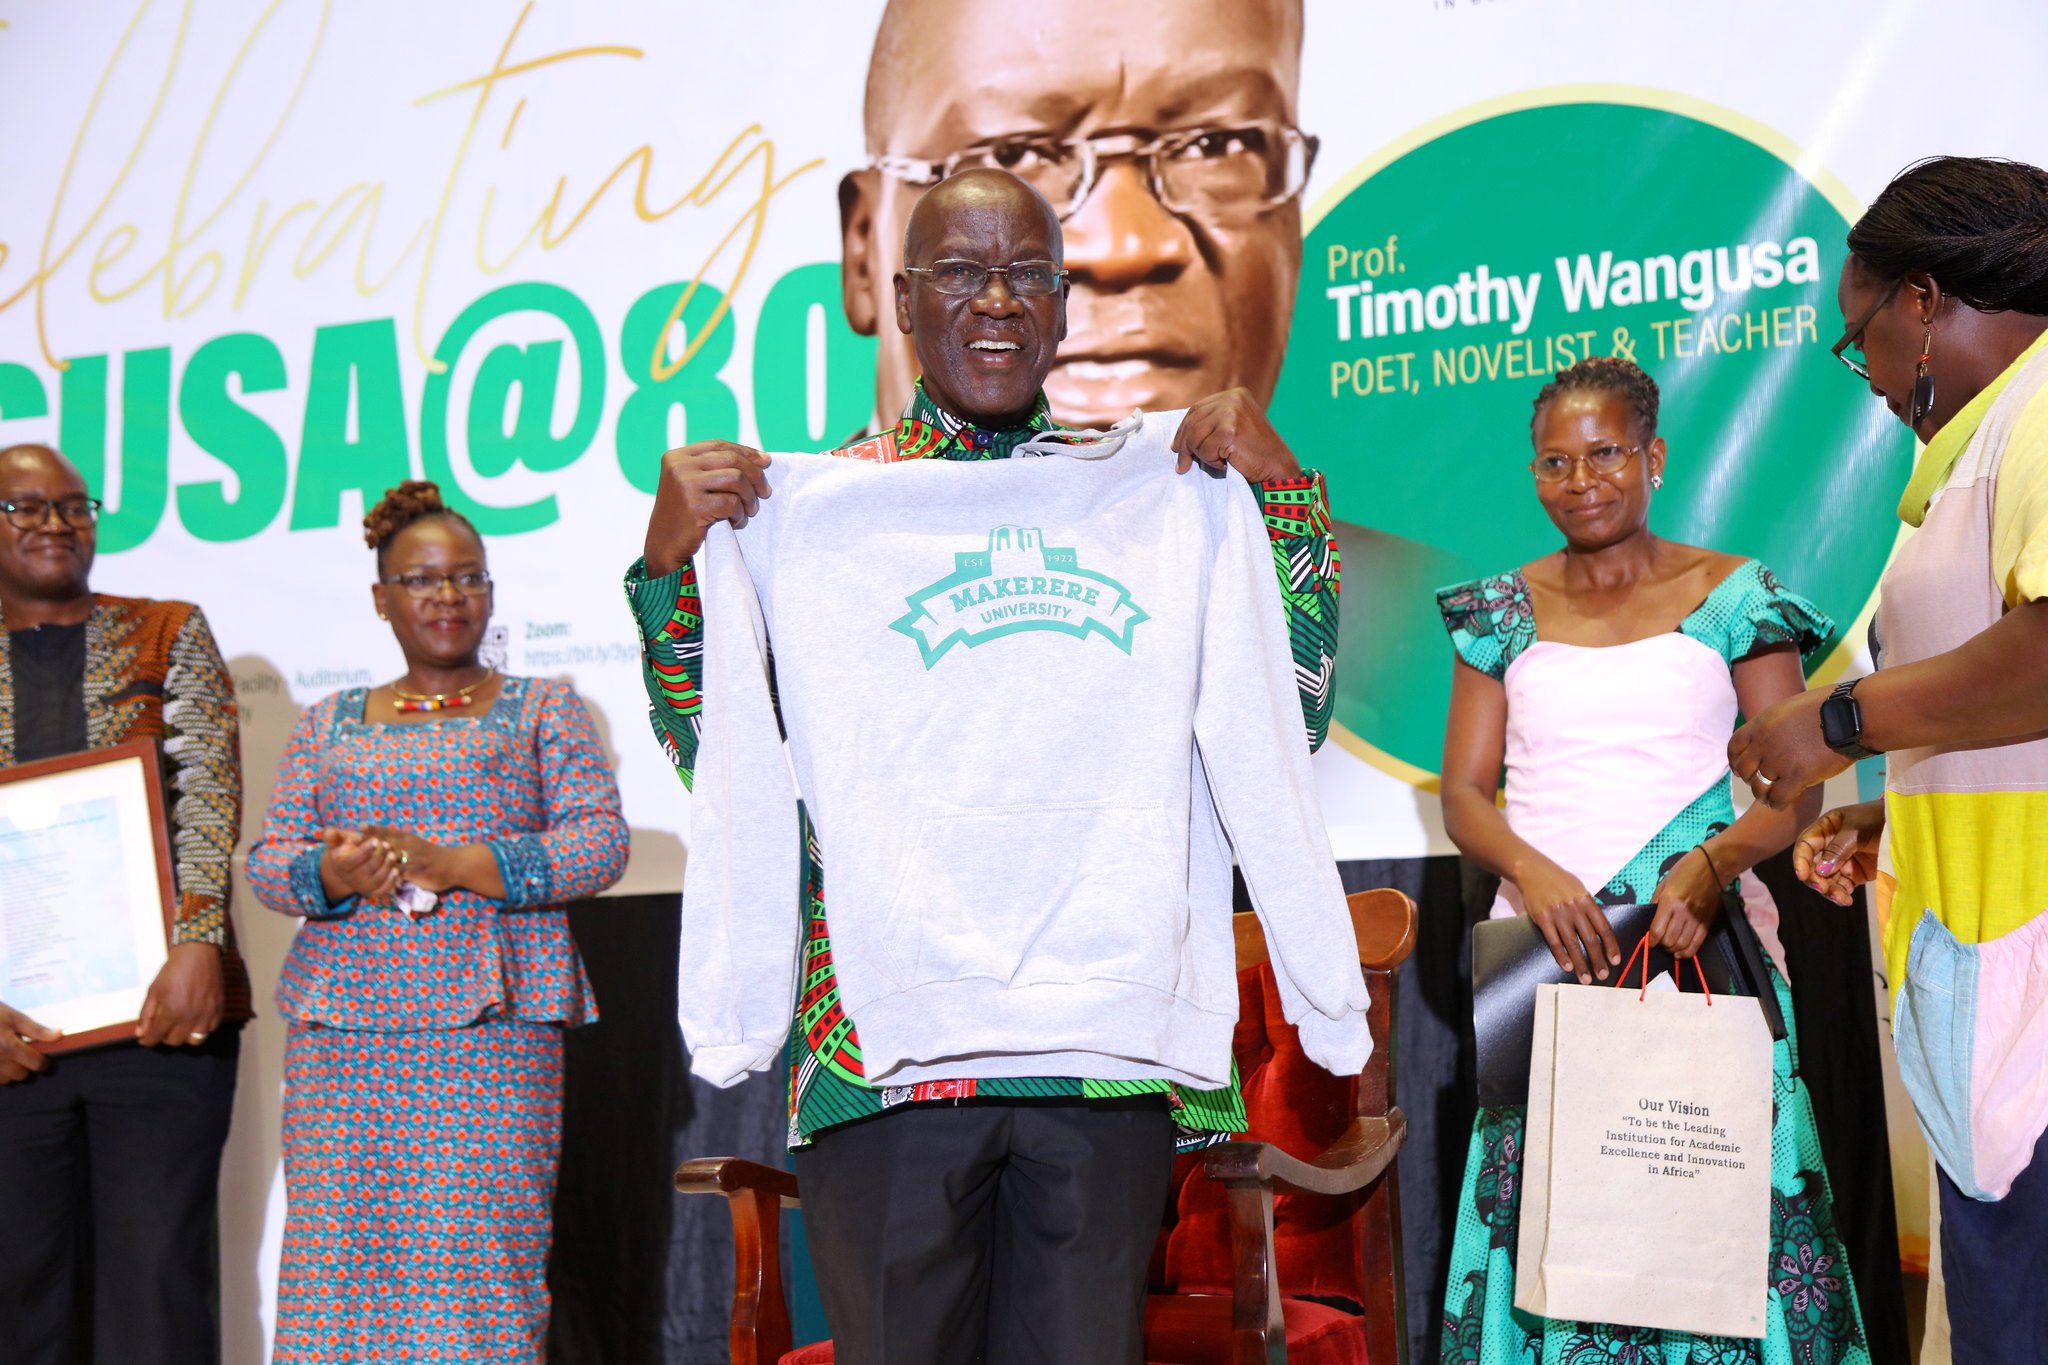 Professor Timothy Wangusa shows off his Makerere Hoodie, one the items in the assortment of souvenirs presented to him during the celebrations on 8th July 2022, Yusuf Lule Central Teaching Facility Auditorium, Makerere University.